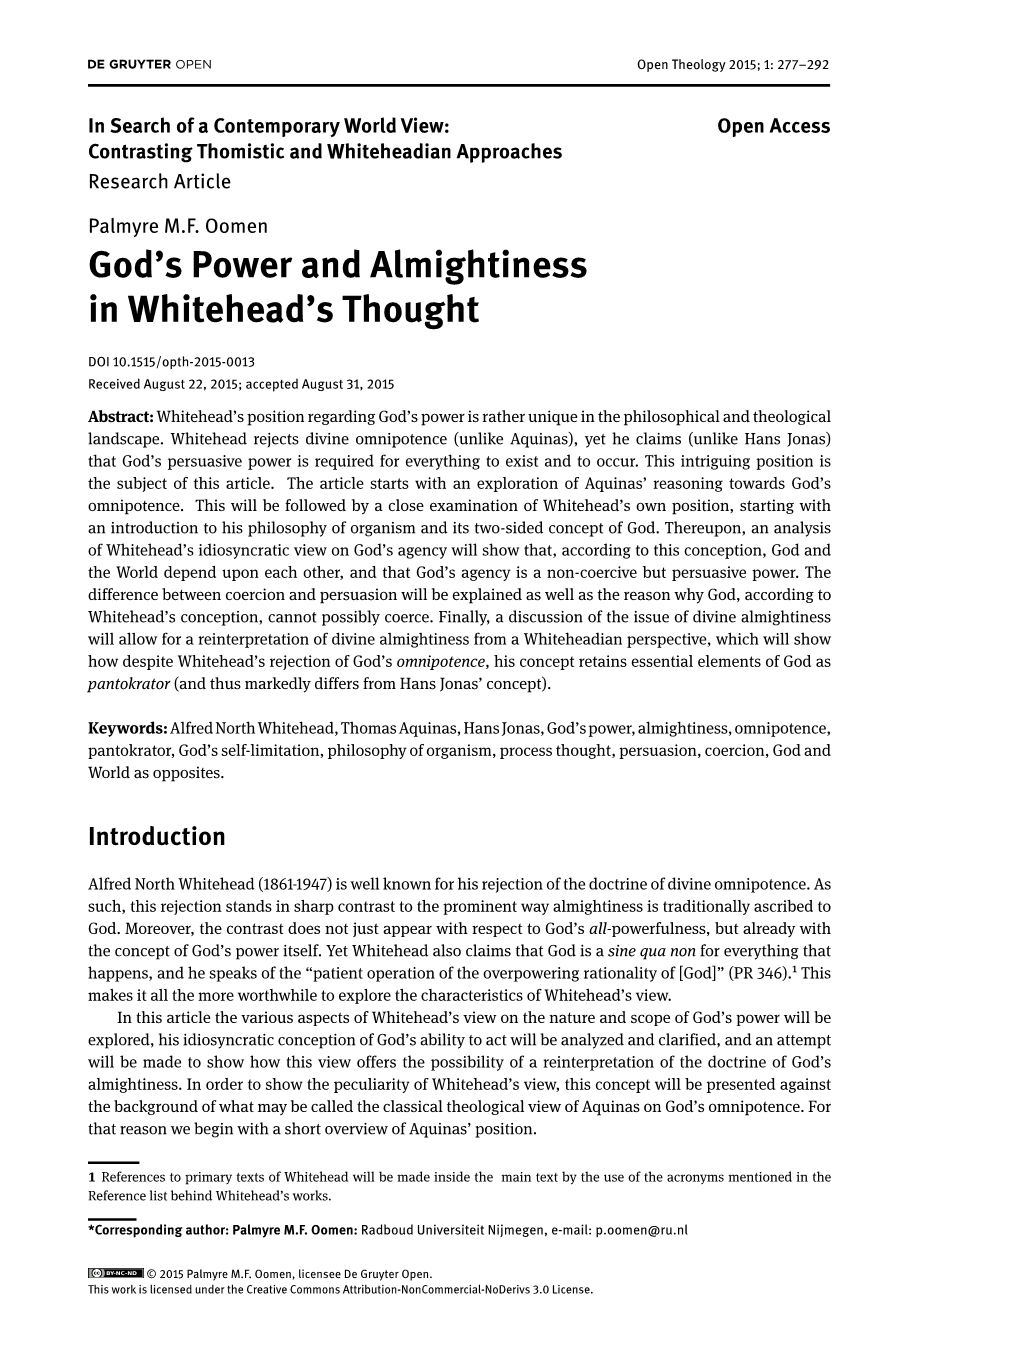 God's Power and Almightiness in Whitehead's Thought